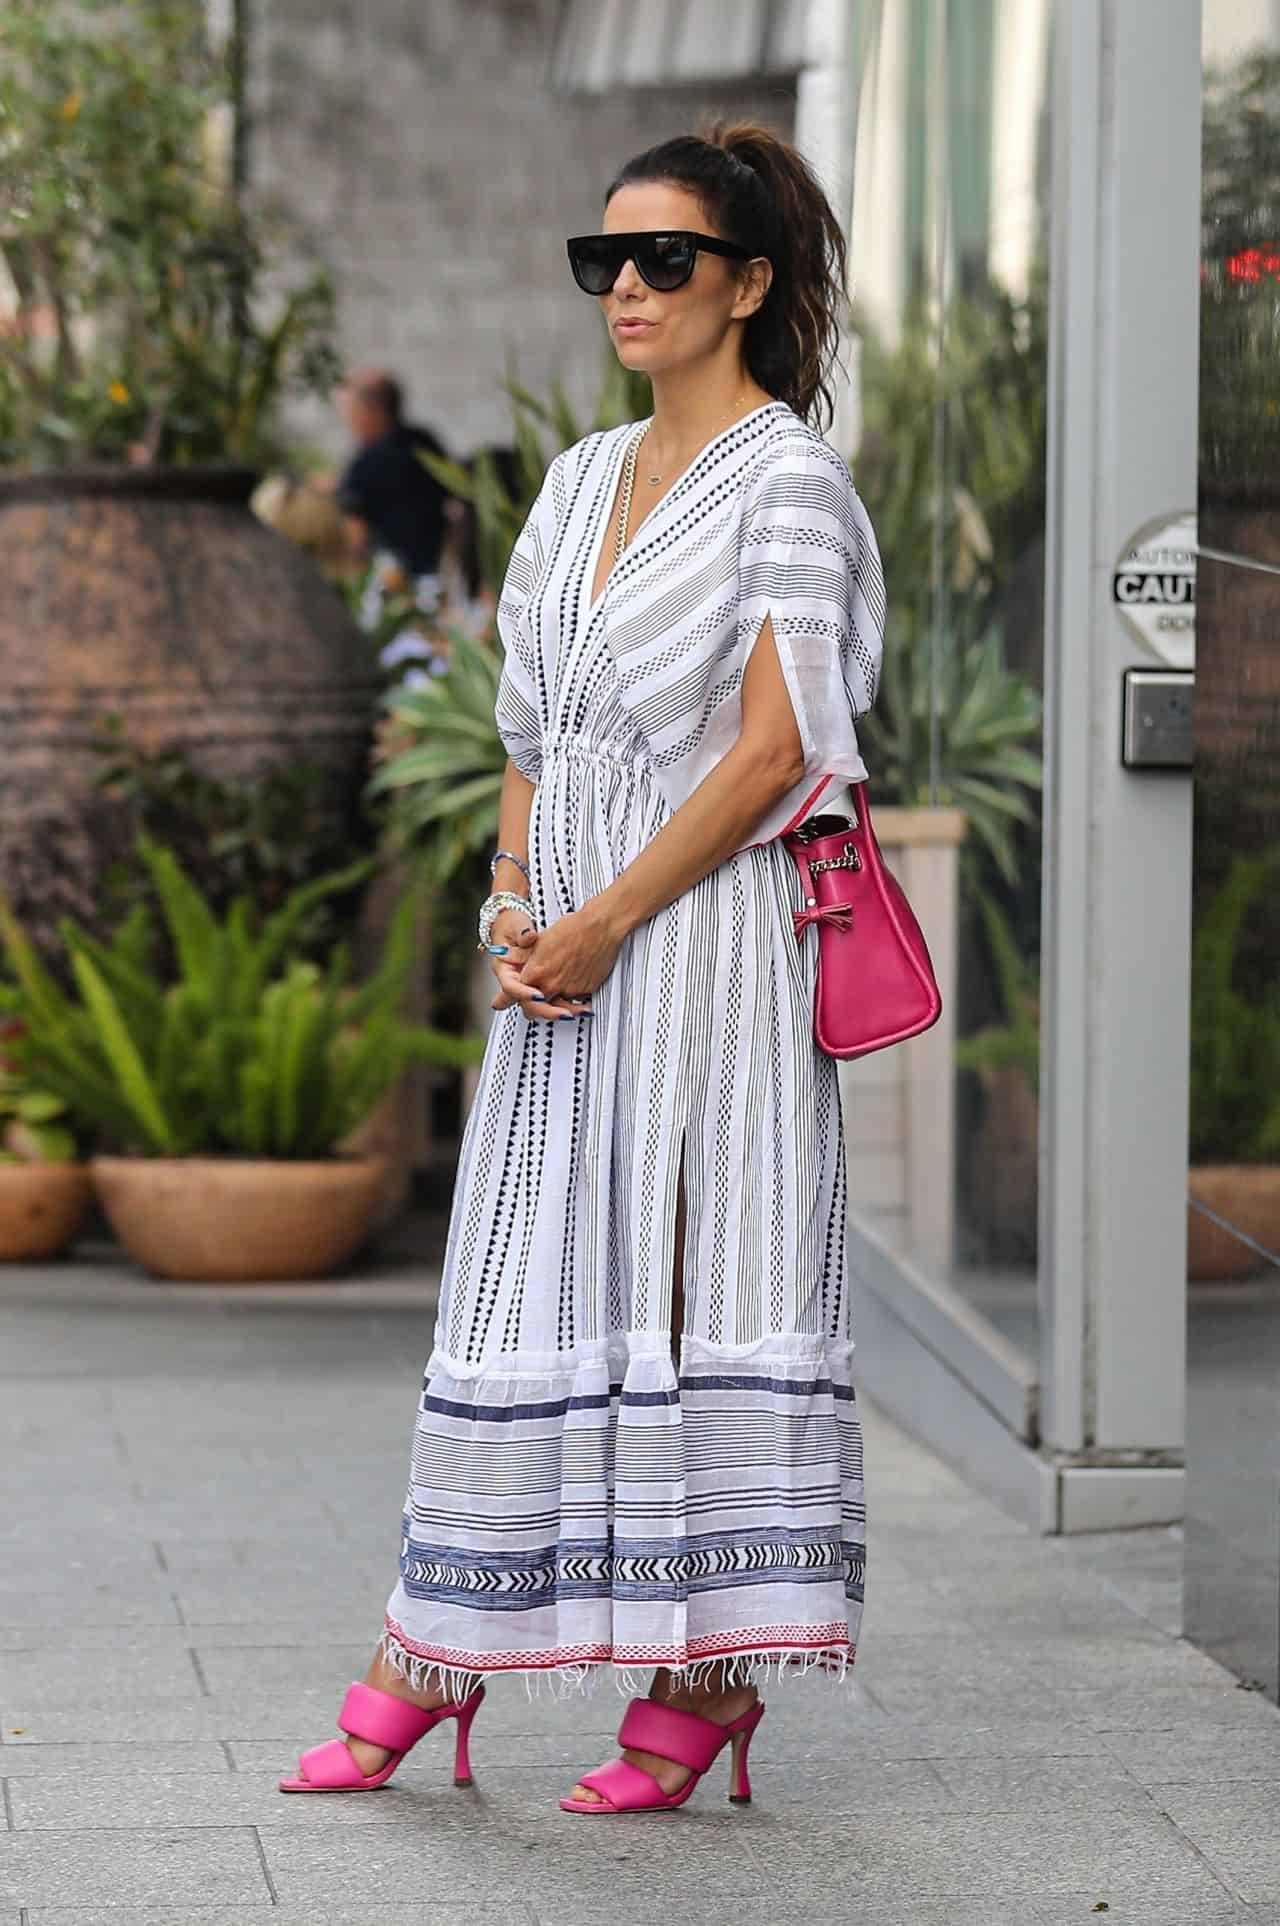 Eva Longoria Exuded Style in a White Striped Summer Dress in Beverly Hills